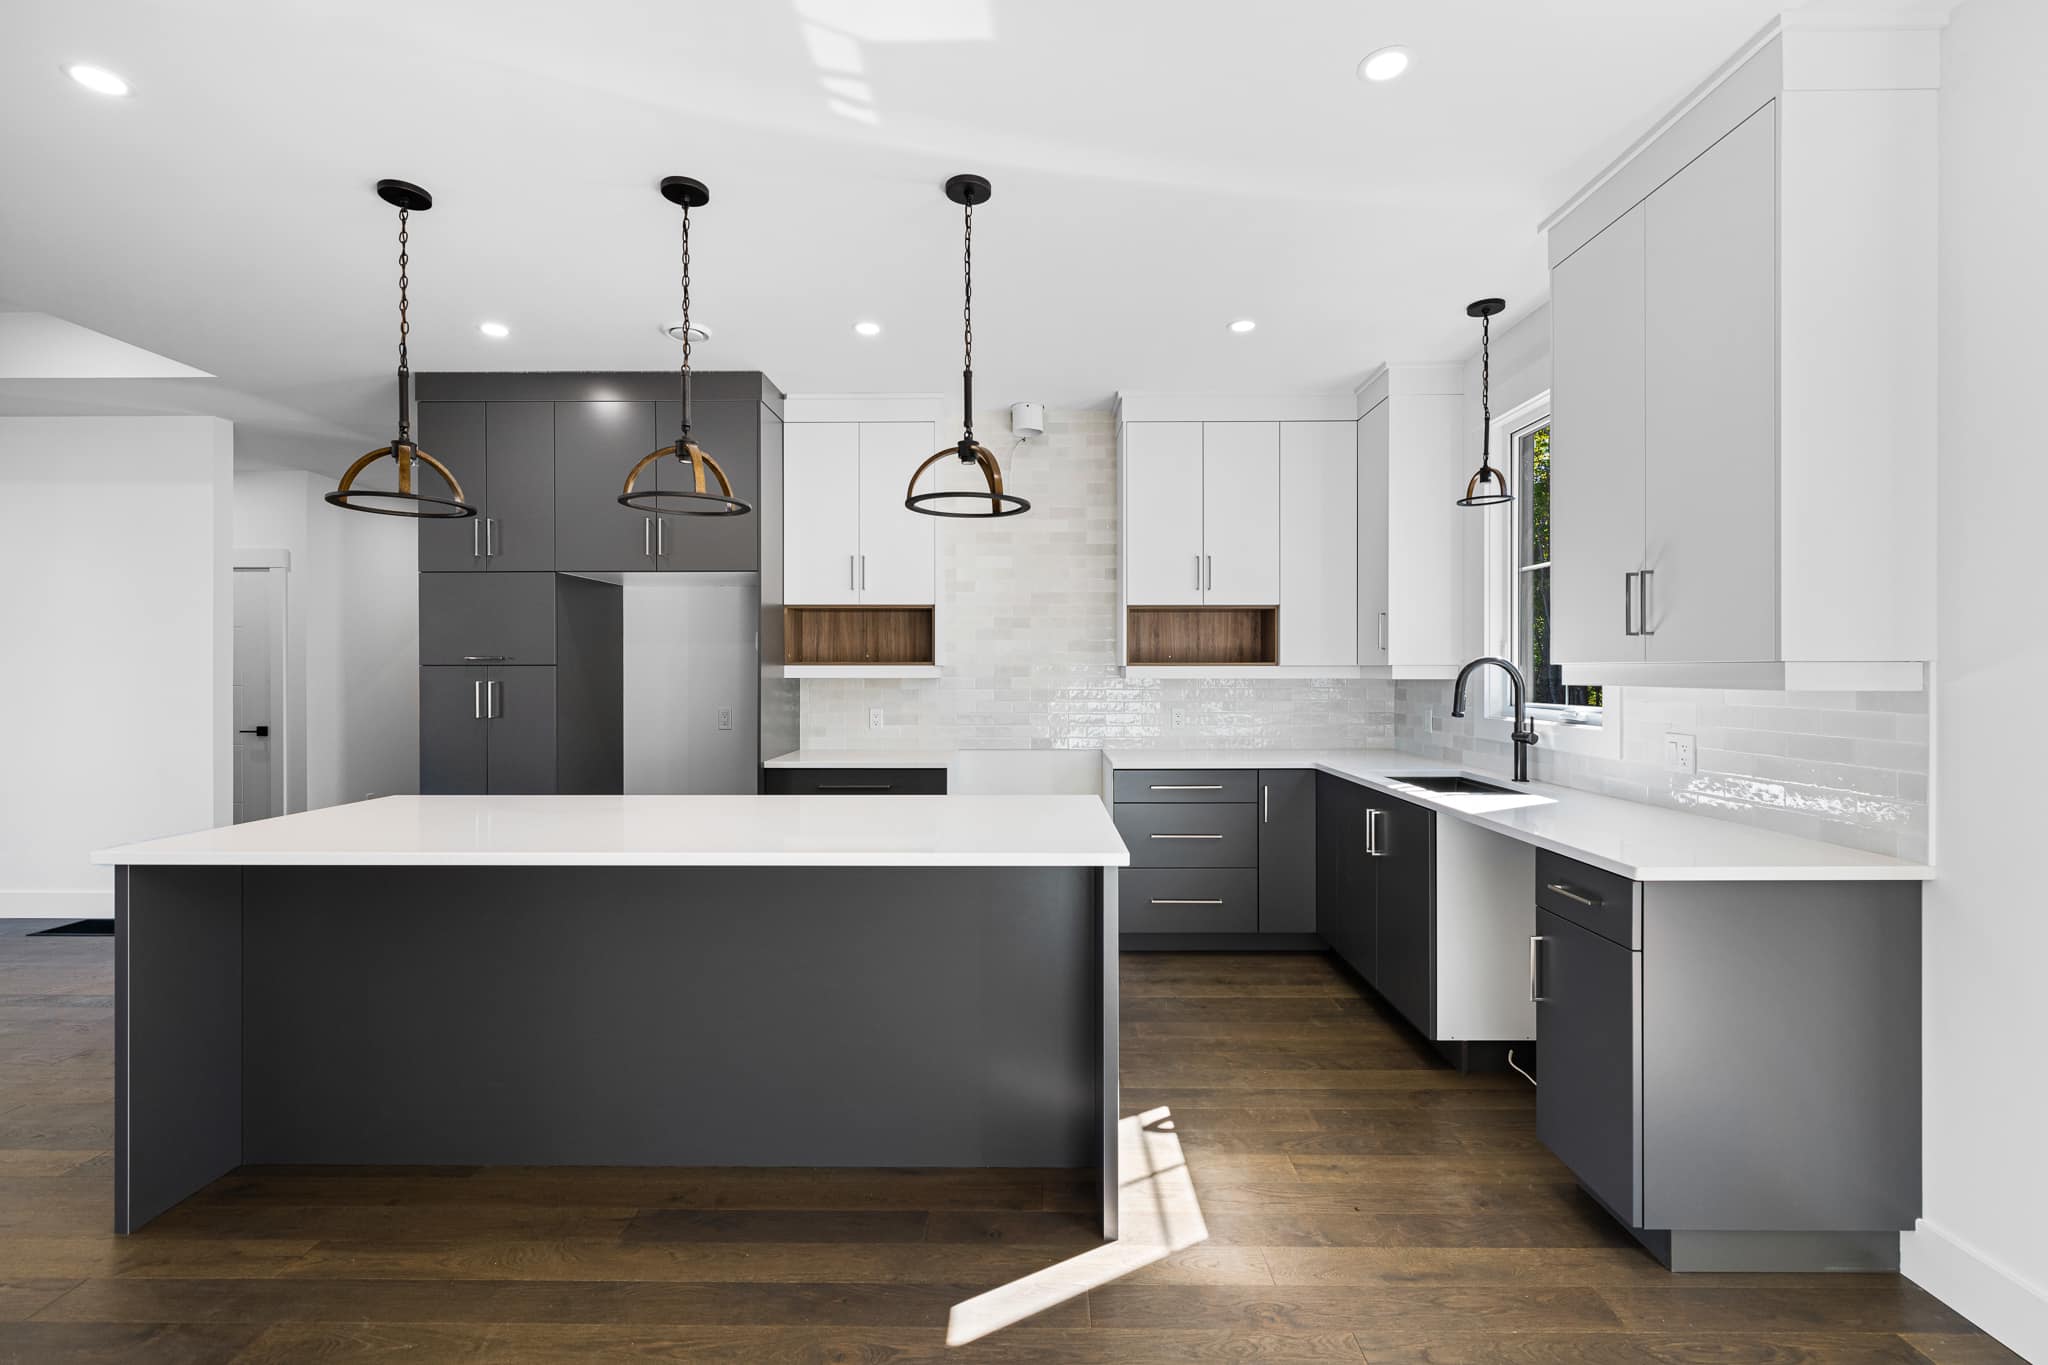 Every Extreme Kitchen project is completed using the same process, and we want you to know what to expect. New construction large open concept kitchen with oversized island. Stunning upper white cabinets, grey lowers, and brass light fixtures.